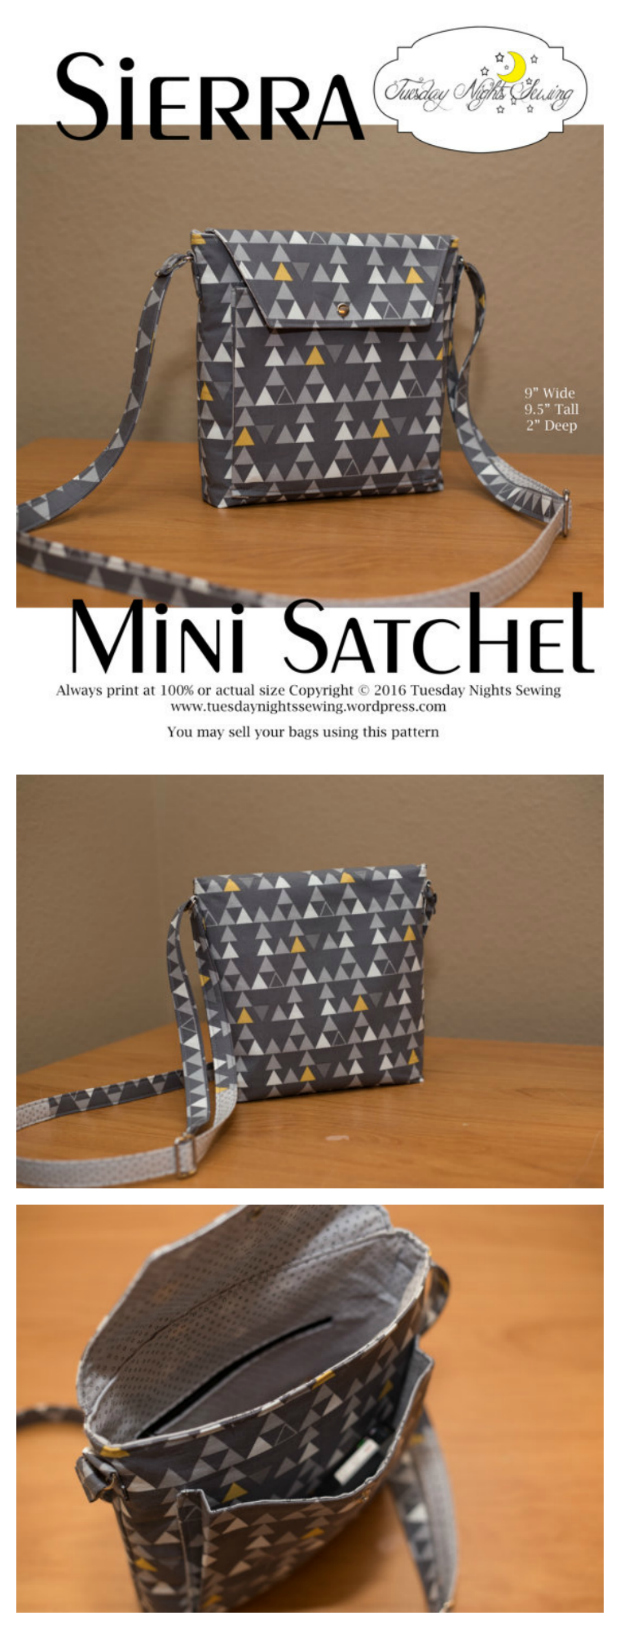 If you want a great medium sized crossbody bag that fits all your everyday needs then you can download here the pattern for the Sierra Mini Satchel. The Sierra Mini Satchel has the following features: a front cargo pocket, an interior zipper pocket, a flap closure with snap, an adjustable strap.